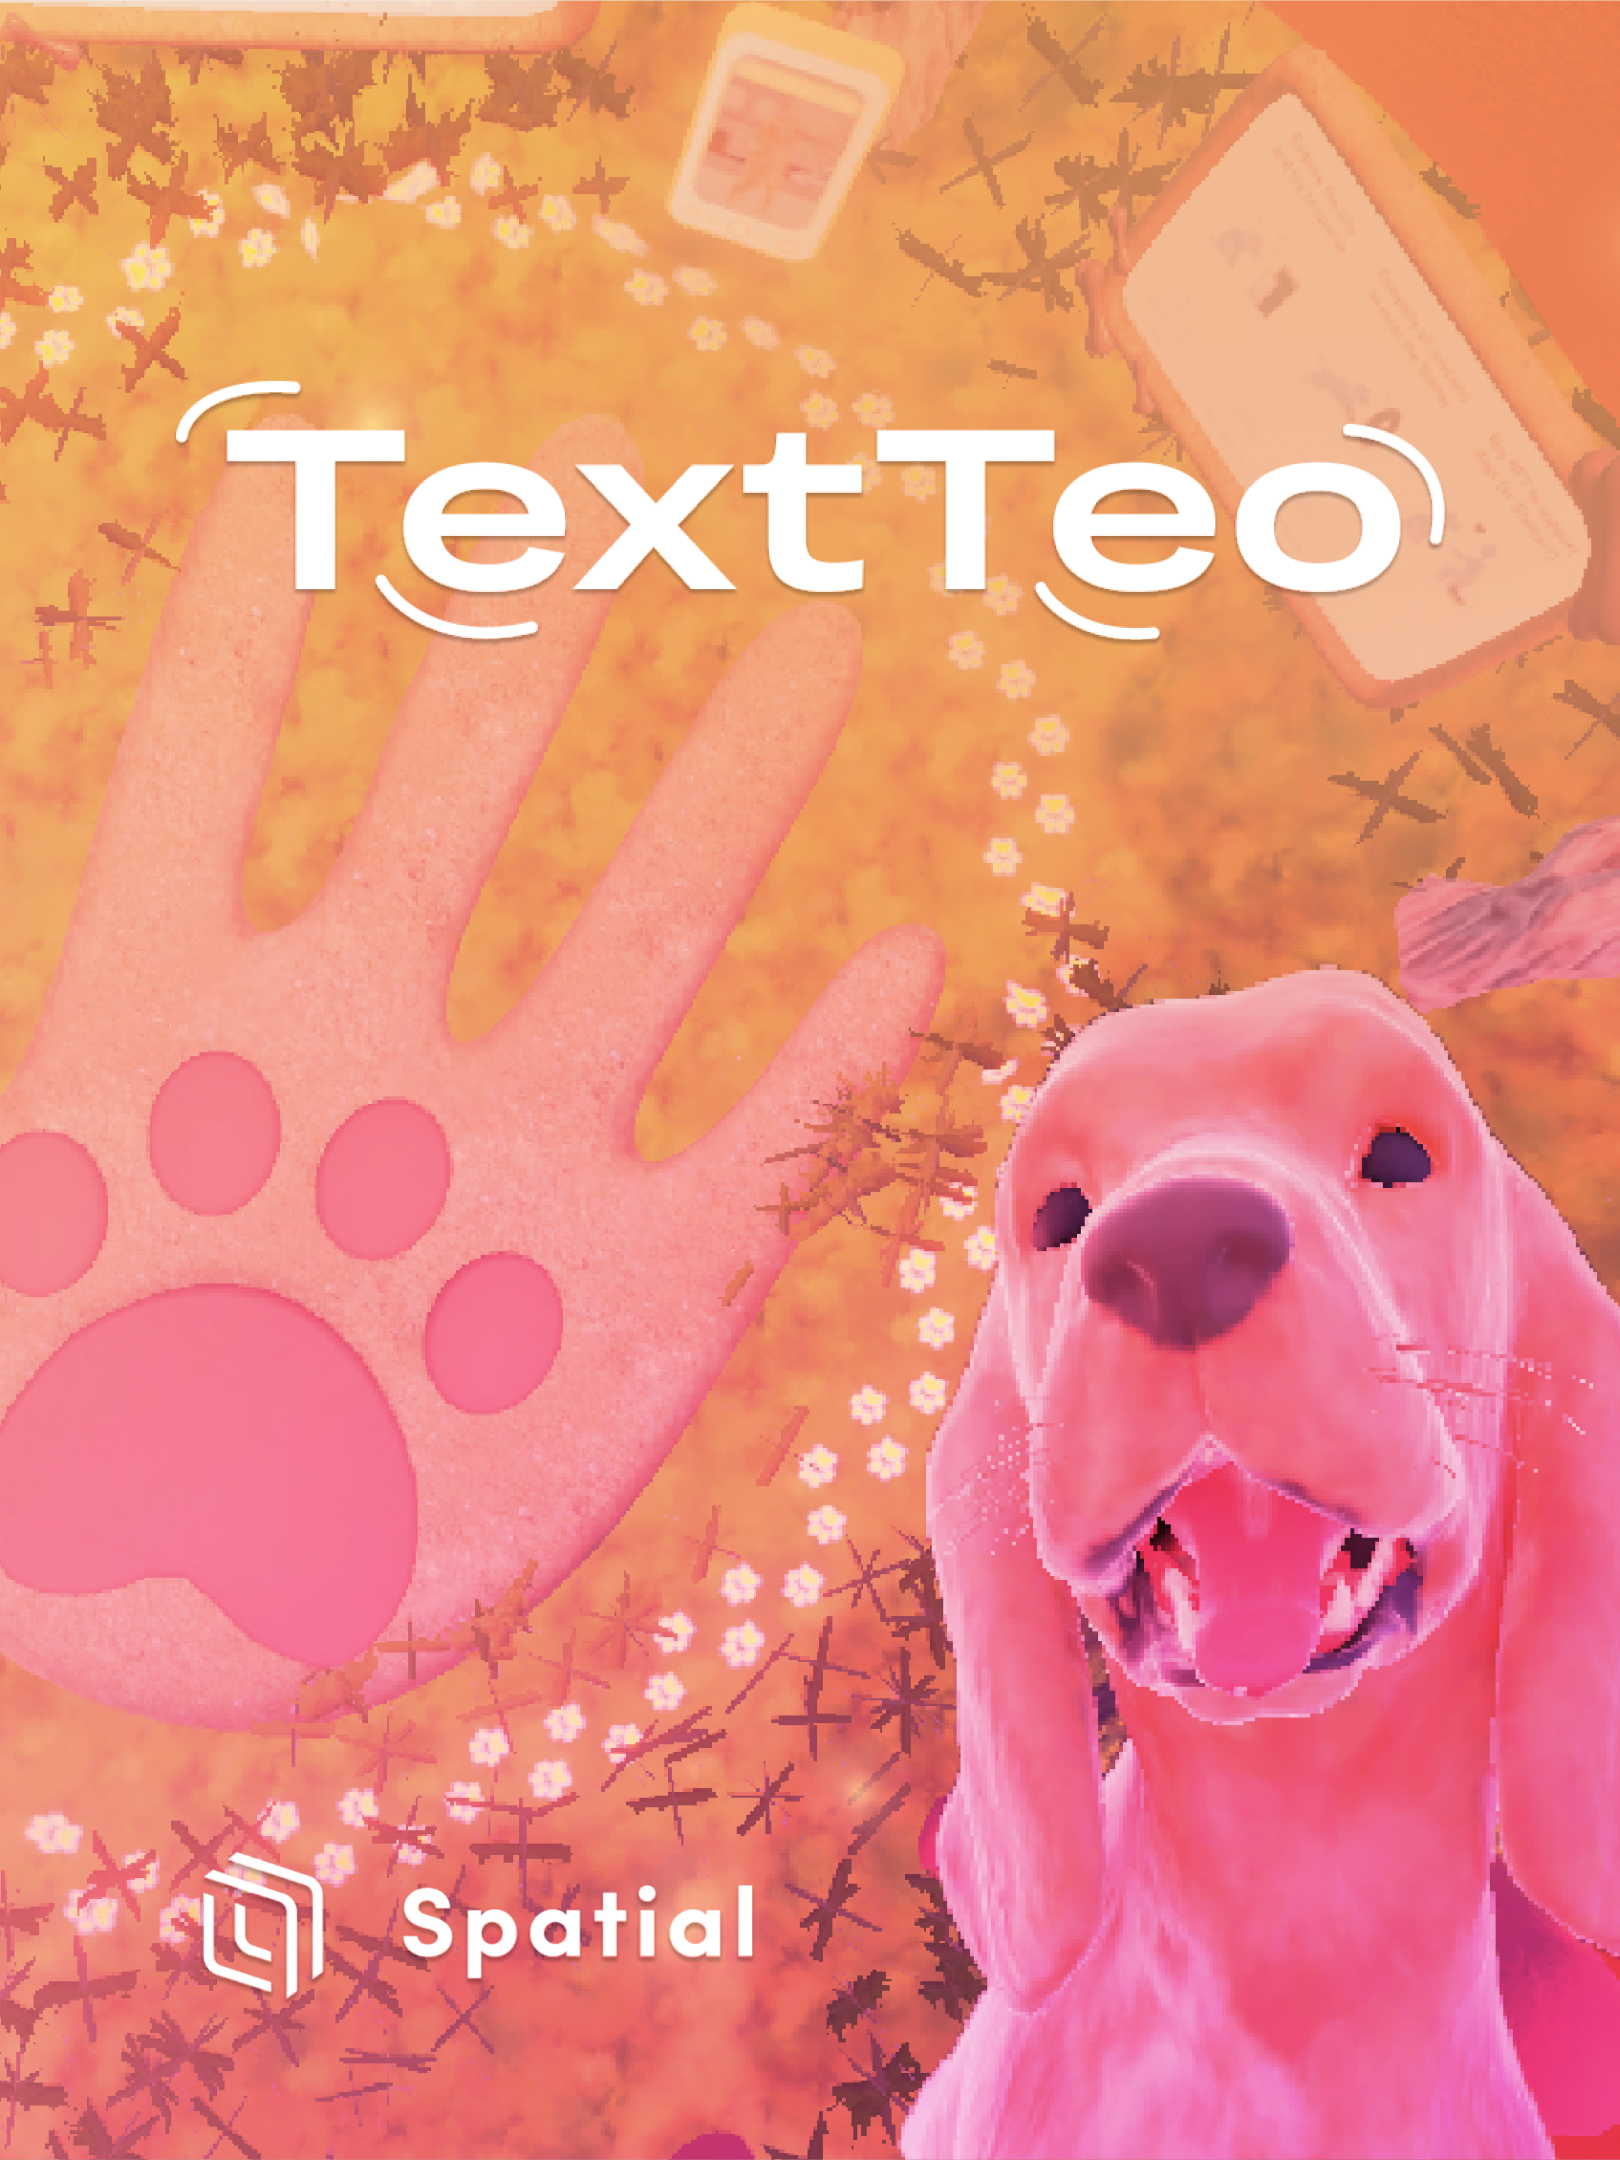 a poster containing the TextTeo logo alongside a picture of a virtual dog and the Spatial logo